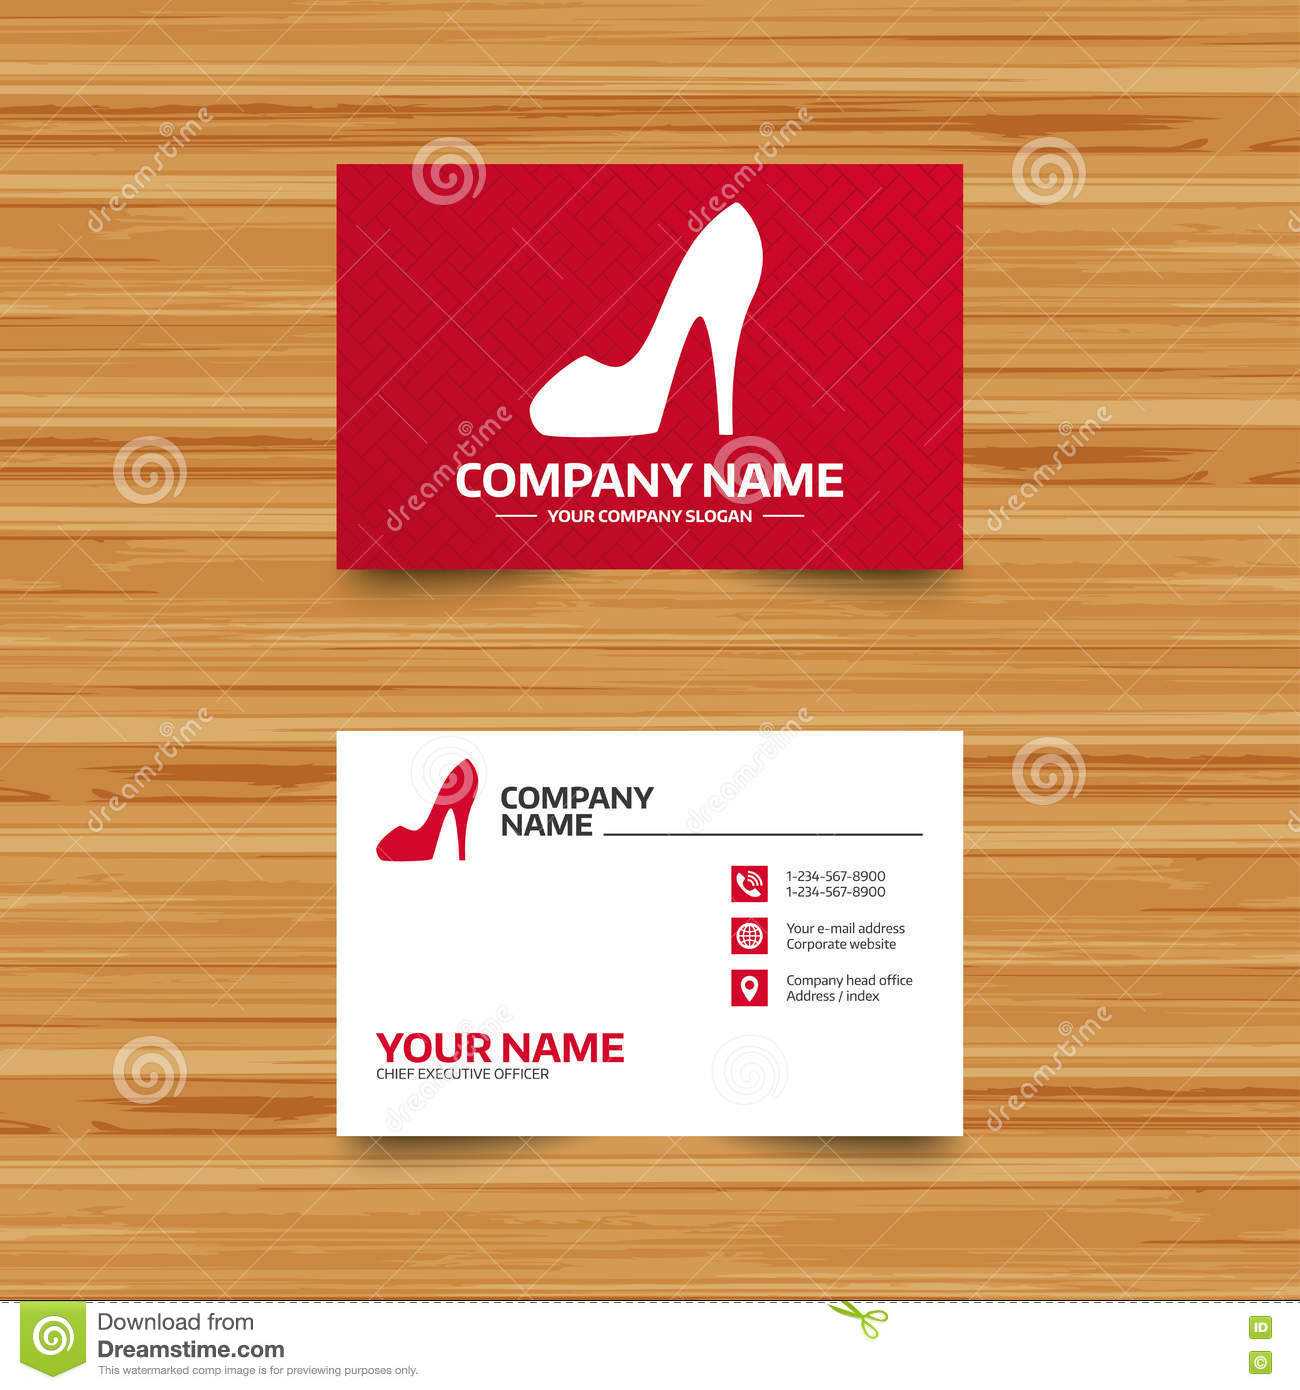 Women's Shoe Sign Icon. High Heels Shoe. Stock Vector Throughout High Heel Template For Cards